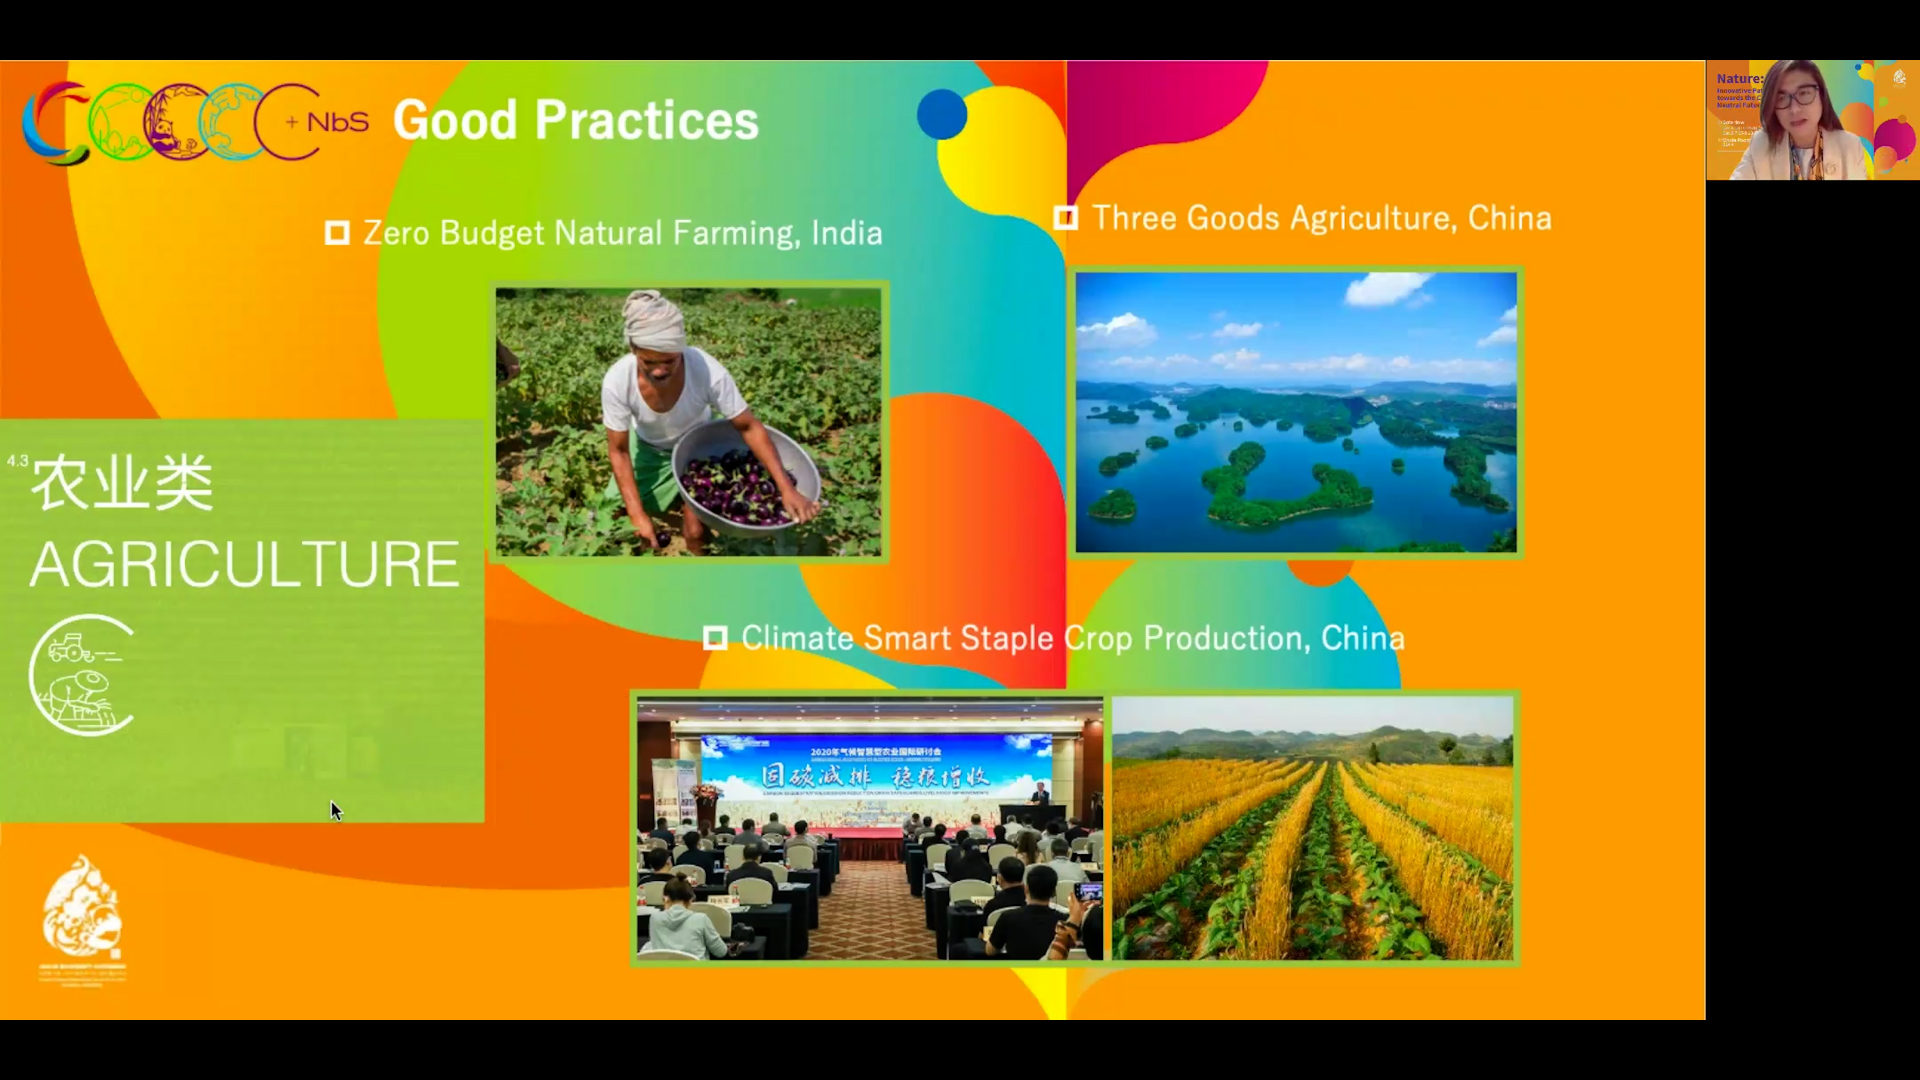 Dr. Wang Binbin gave keynote speech on the good practices on Nature-based Solutions.
Source: ICCSD
